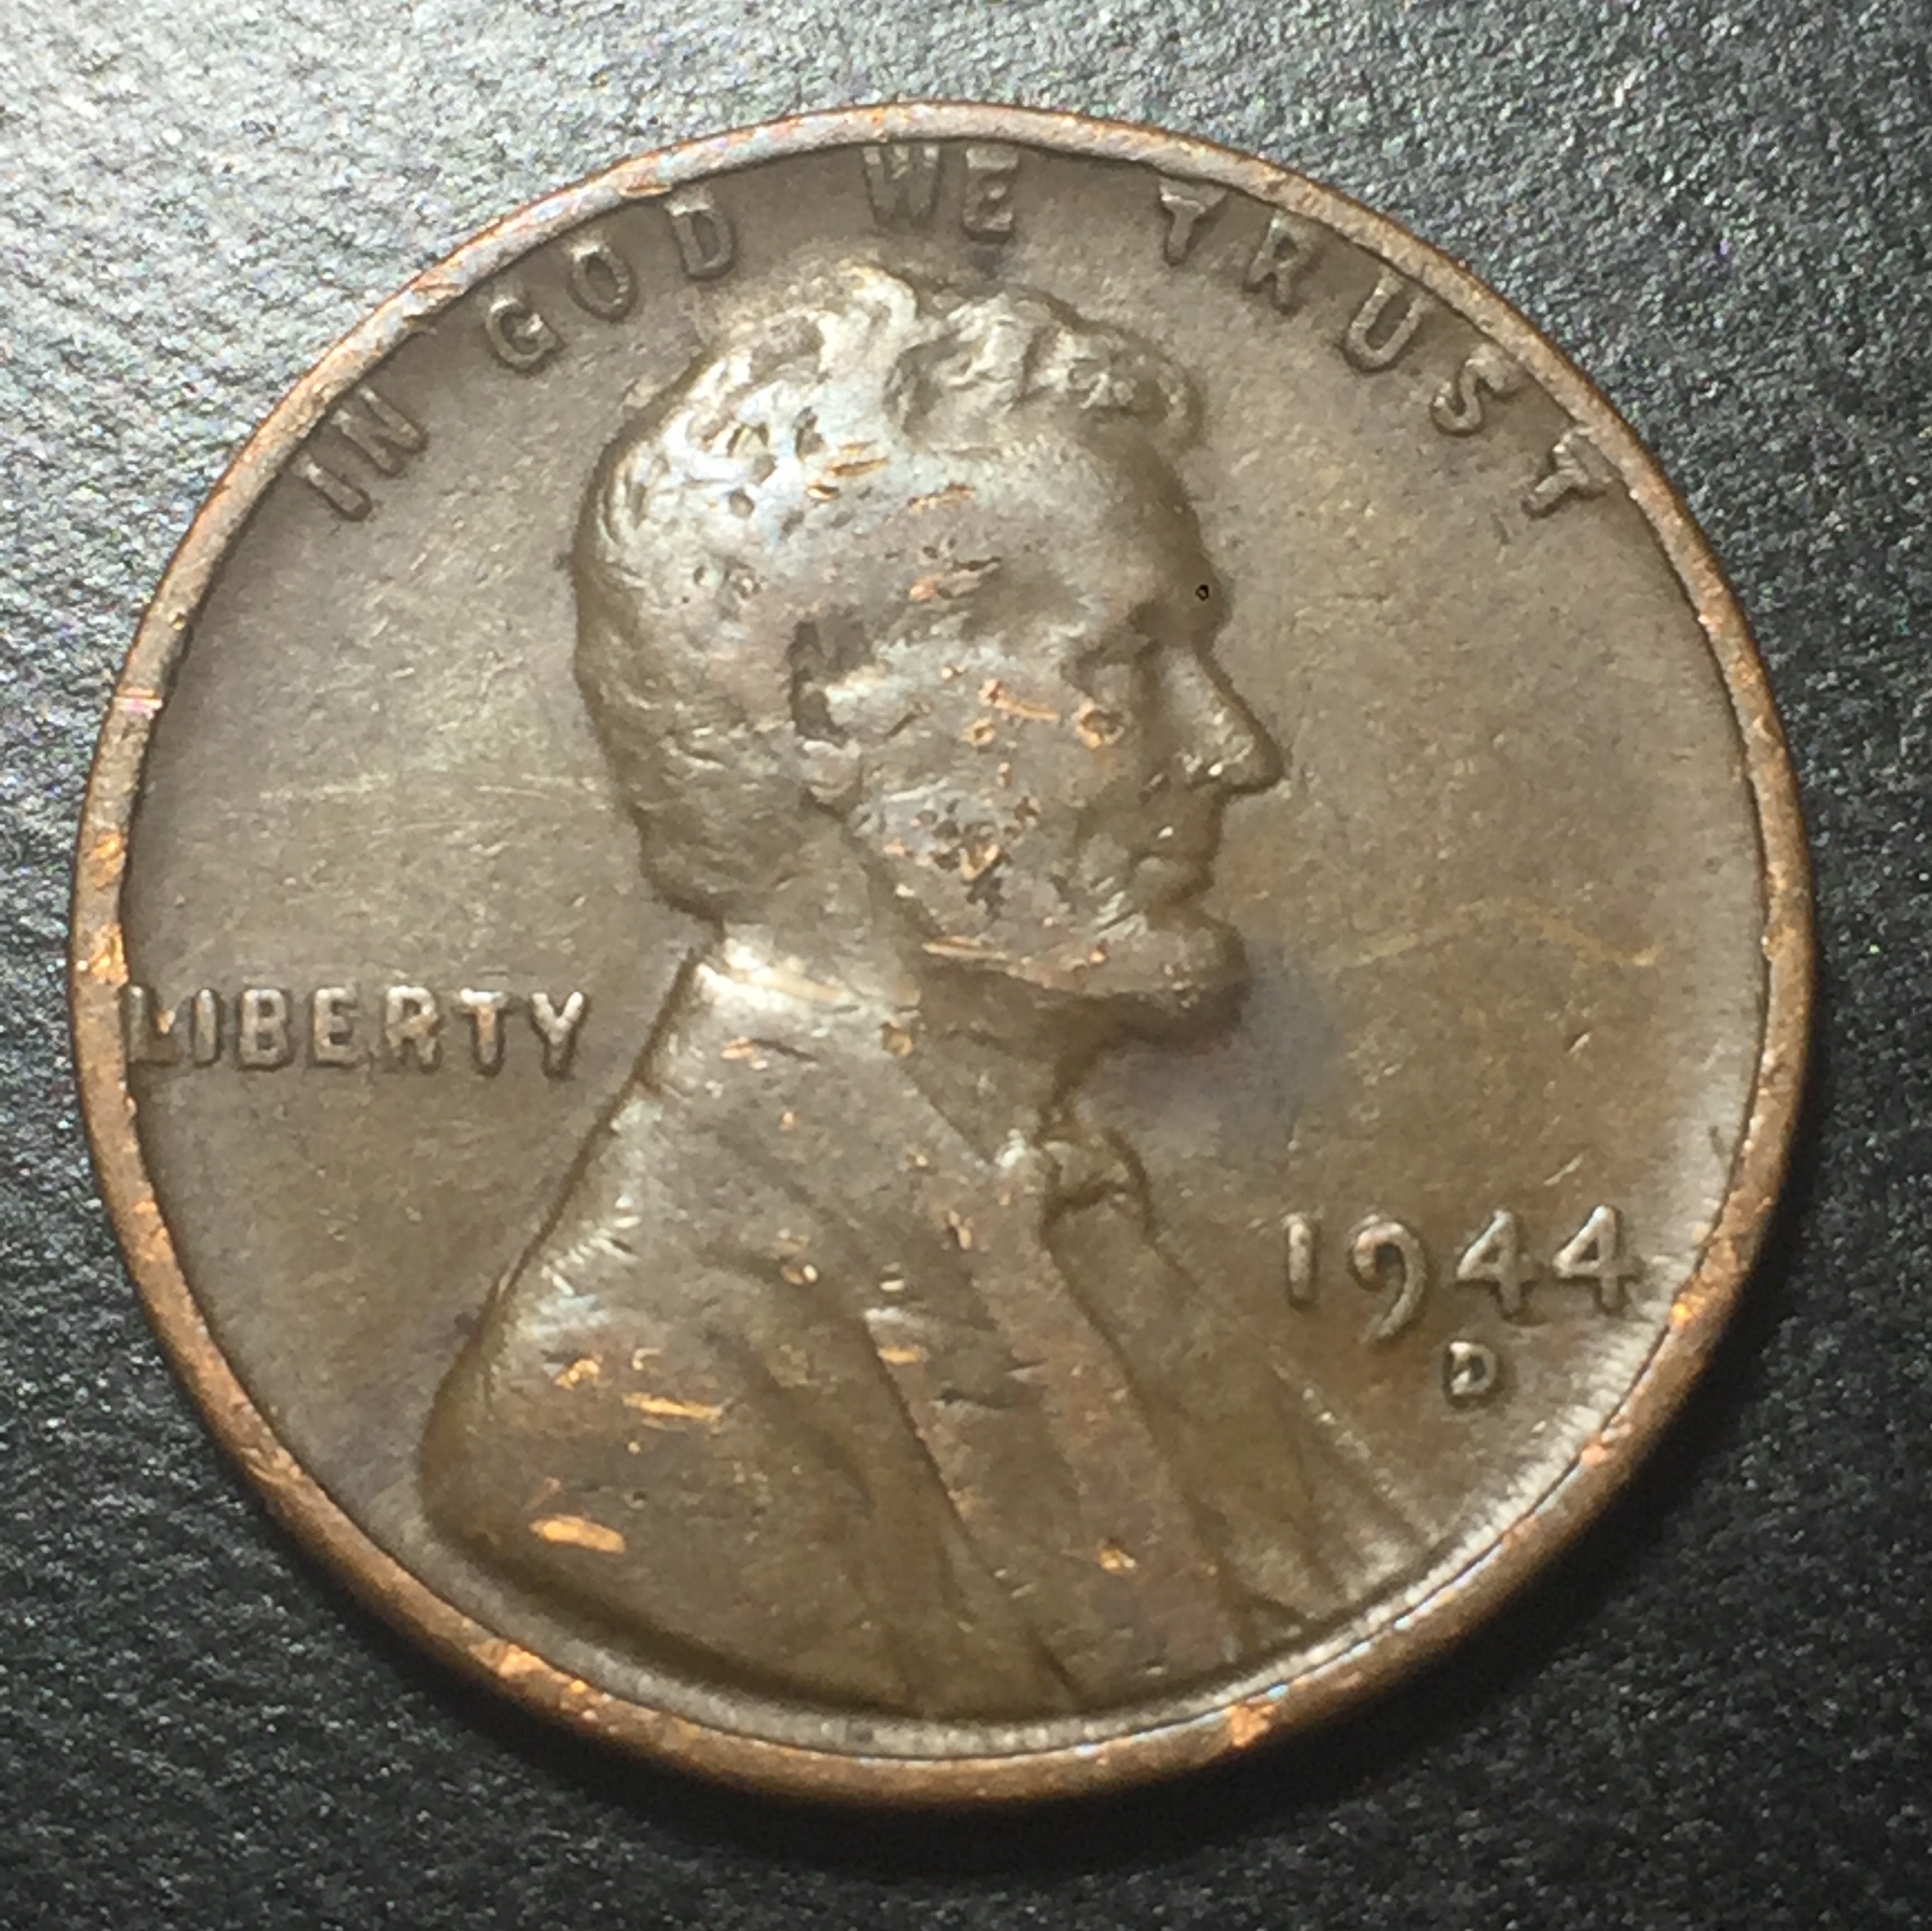 I have a 1944 Lincoln wheat penny, what is it worth?